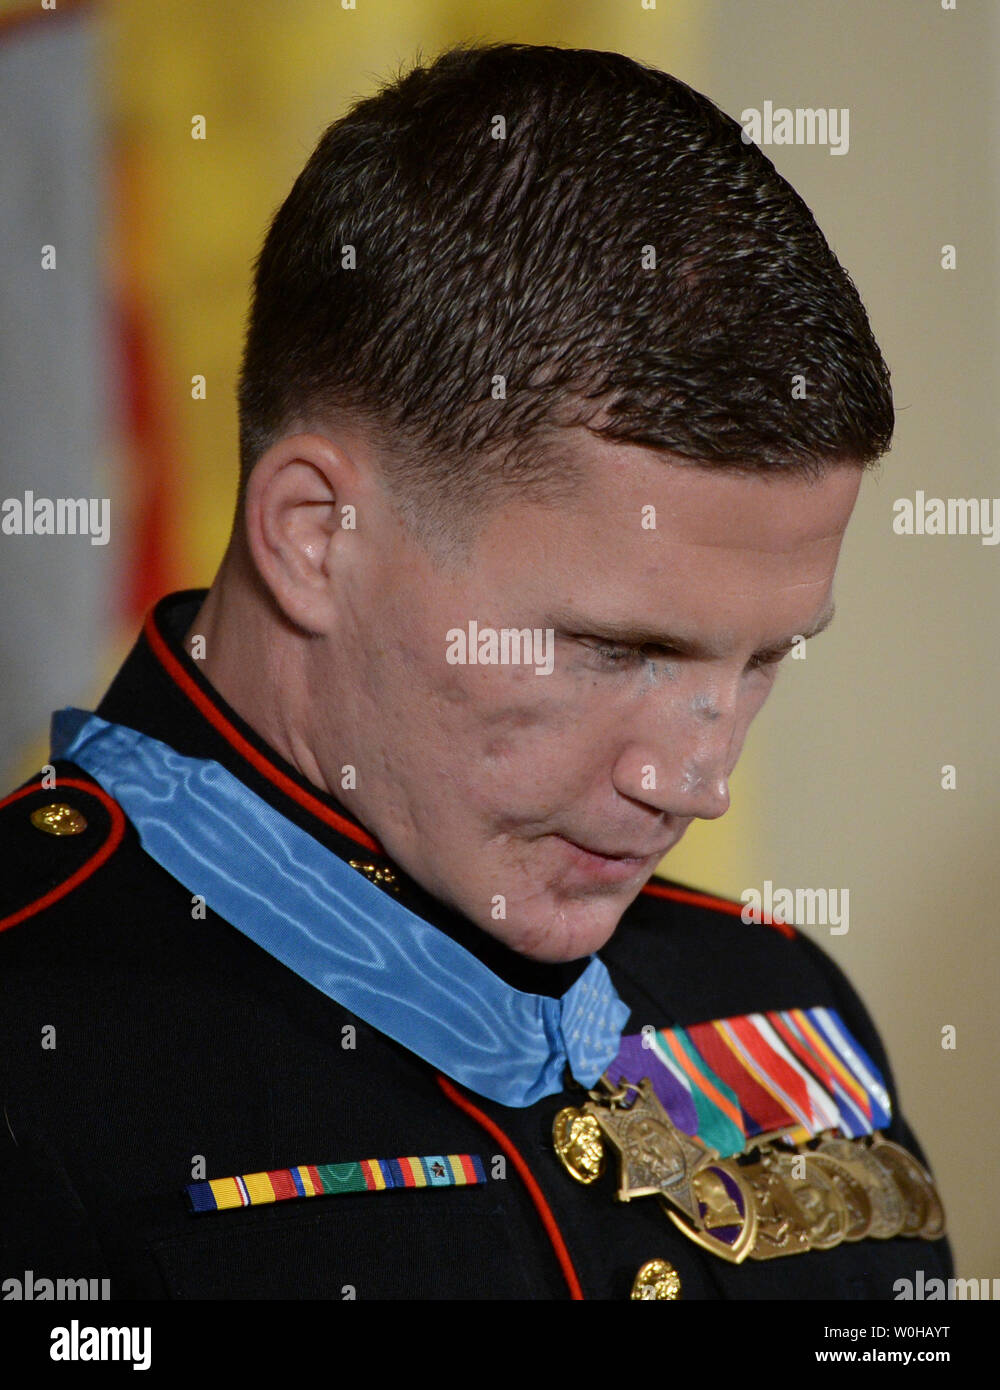 Retired Marine William 'Kyle' Carpenter bows his head during the benediction in a ceremony where President Barack Obama awarded him the  Medal of Honor in the East Room of the White House in Washington, DC on June 19, 2014.  Carpenter, 24, of Gilbert, South Carolina was awarded the nation's highest award for gallantry for covering a grenade with his body to save a Marine's life in Afghanistan in 2010.    UPI/Pat Benic Stock Photo